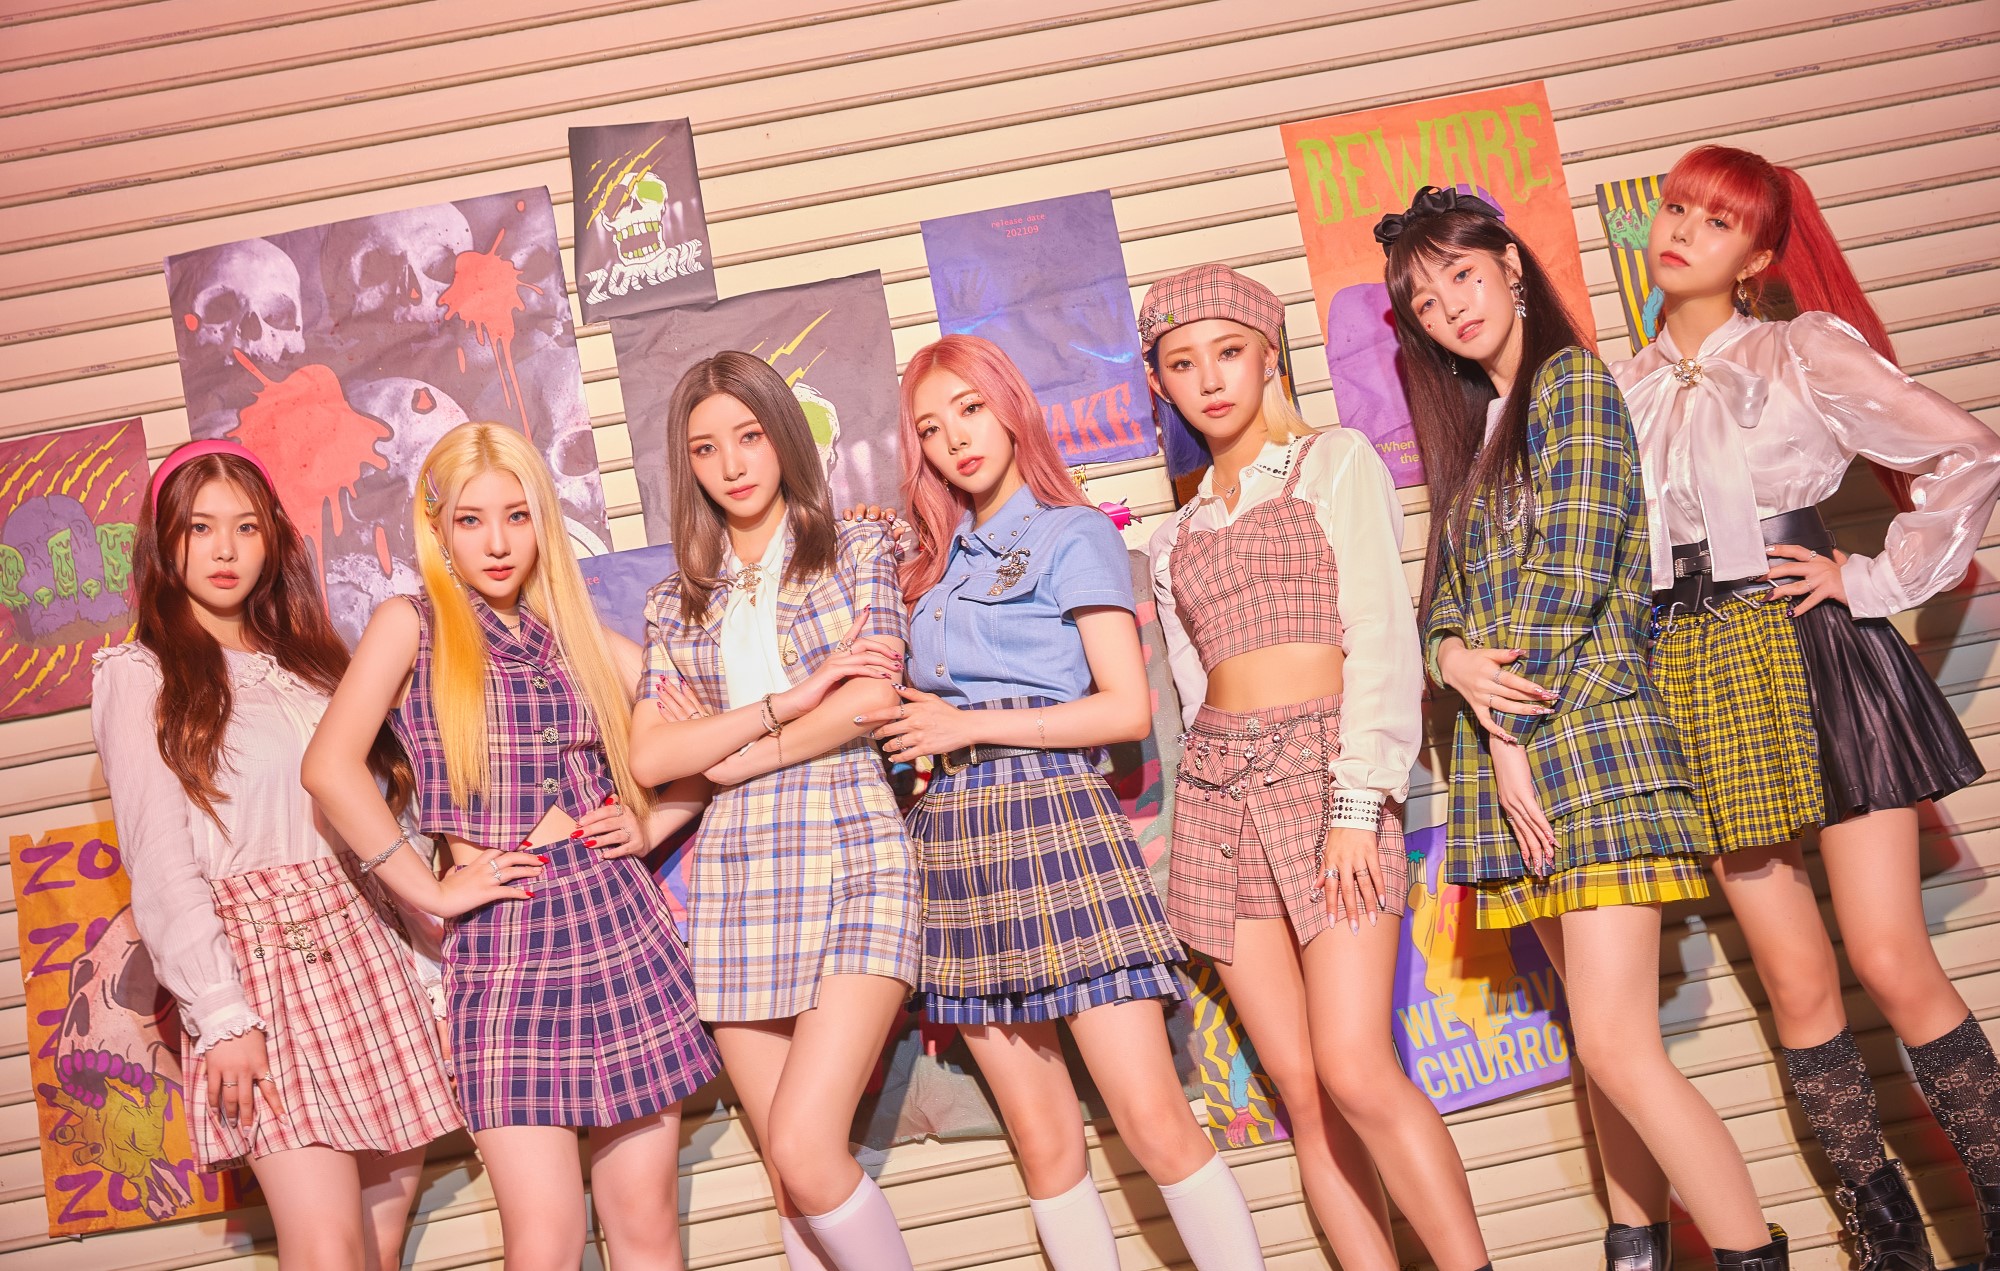 PURPLE KISS on their future: “Our team is an unscratched lottery ticket”